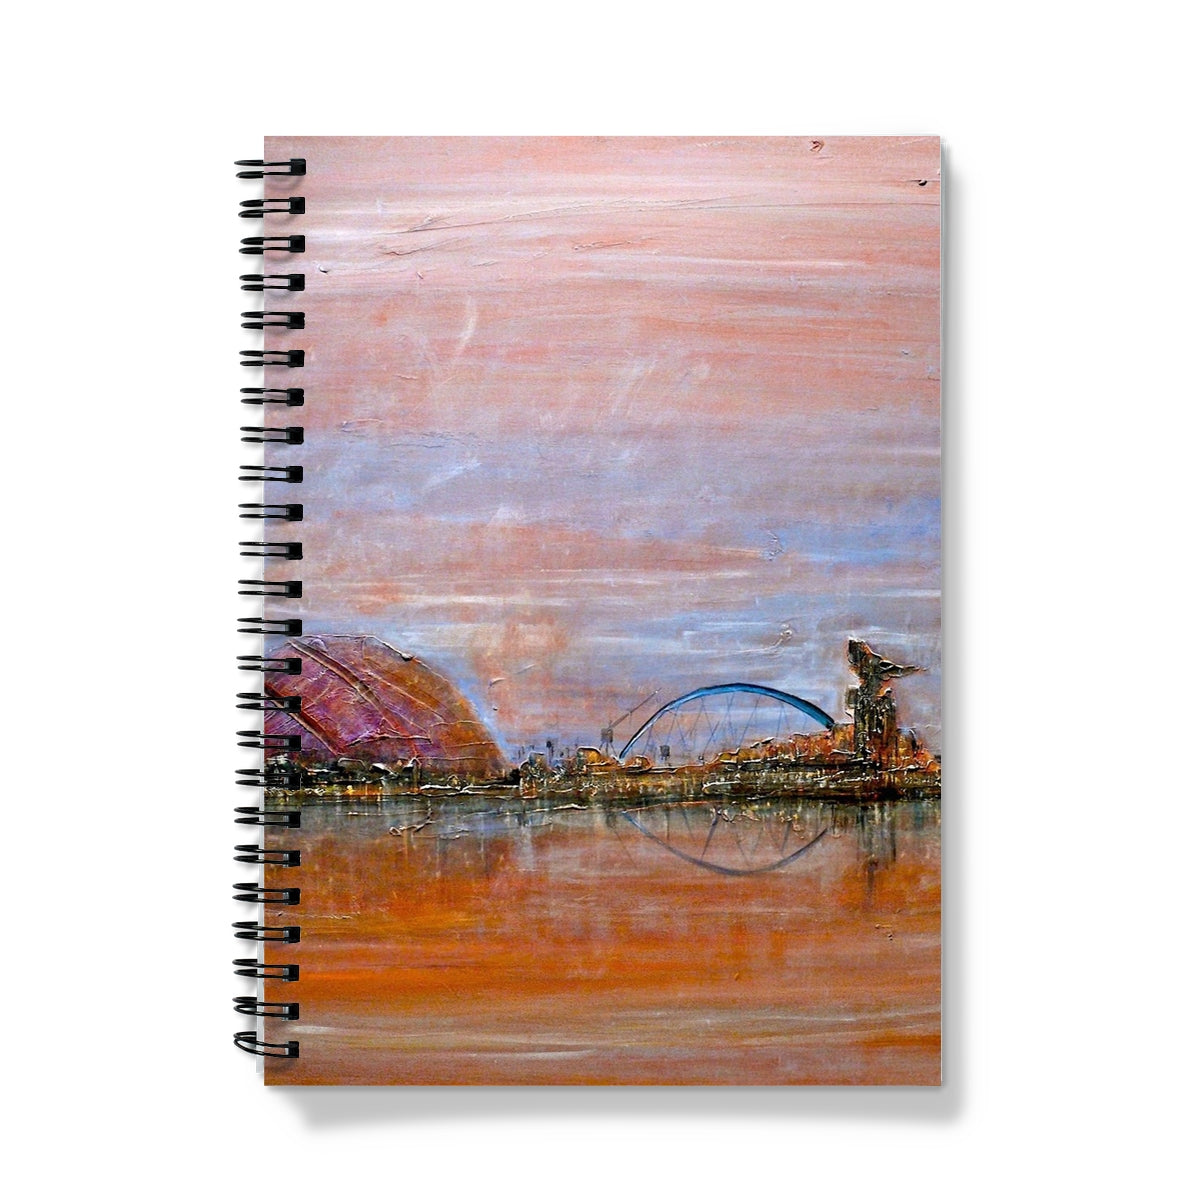 Glasgow Harbour Art Gifts Notebook-Journals & Notebooks-Edinburgh & Glasgow Art Gallery-A4-Graph-Paintings, Prints, Homeware, Art Gifts From Scotland By Scottish Artist Kevin Hunter